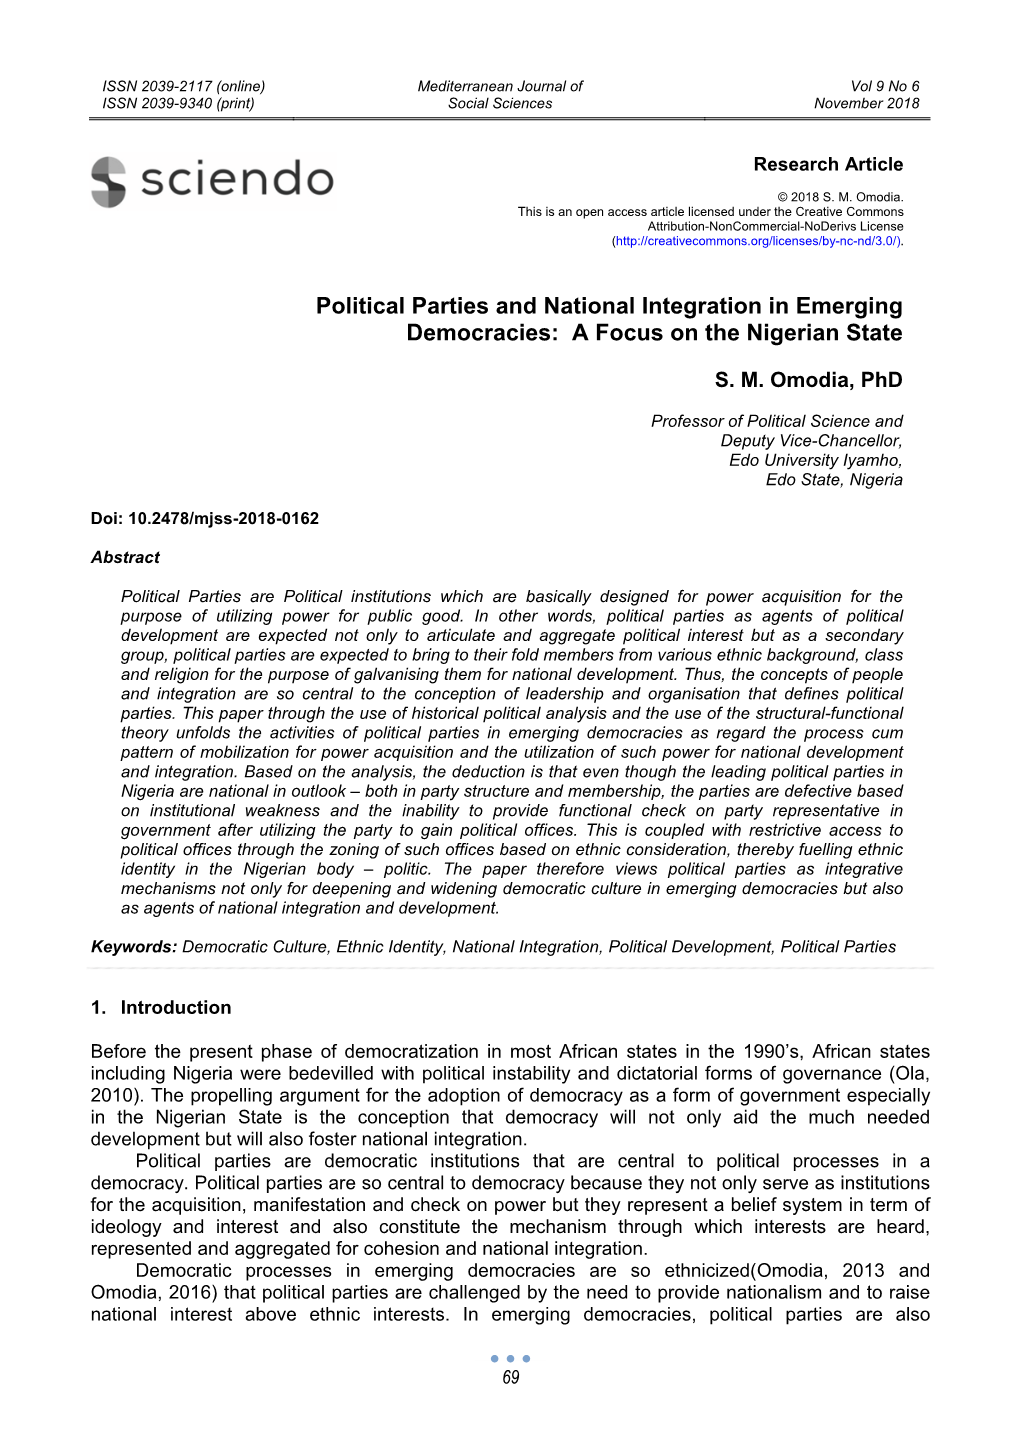 Political Parties and National Integration in Emerging Democracies: a Focus on the Nigerian State